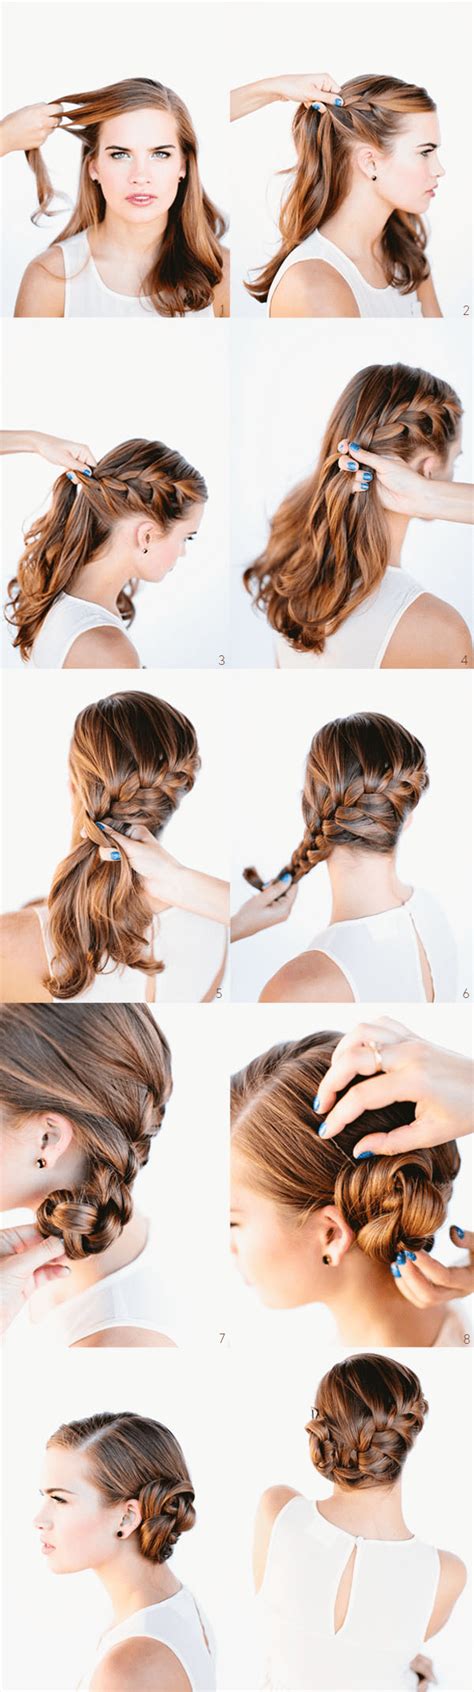 17 Quick And Easy Diy Hairstyle Tutorials All For Fashion Design